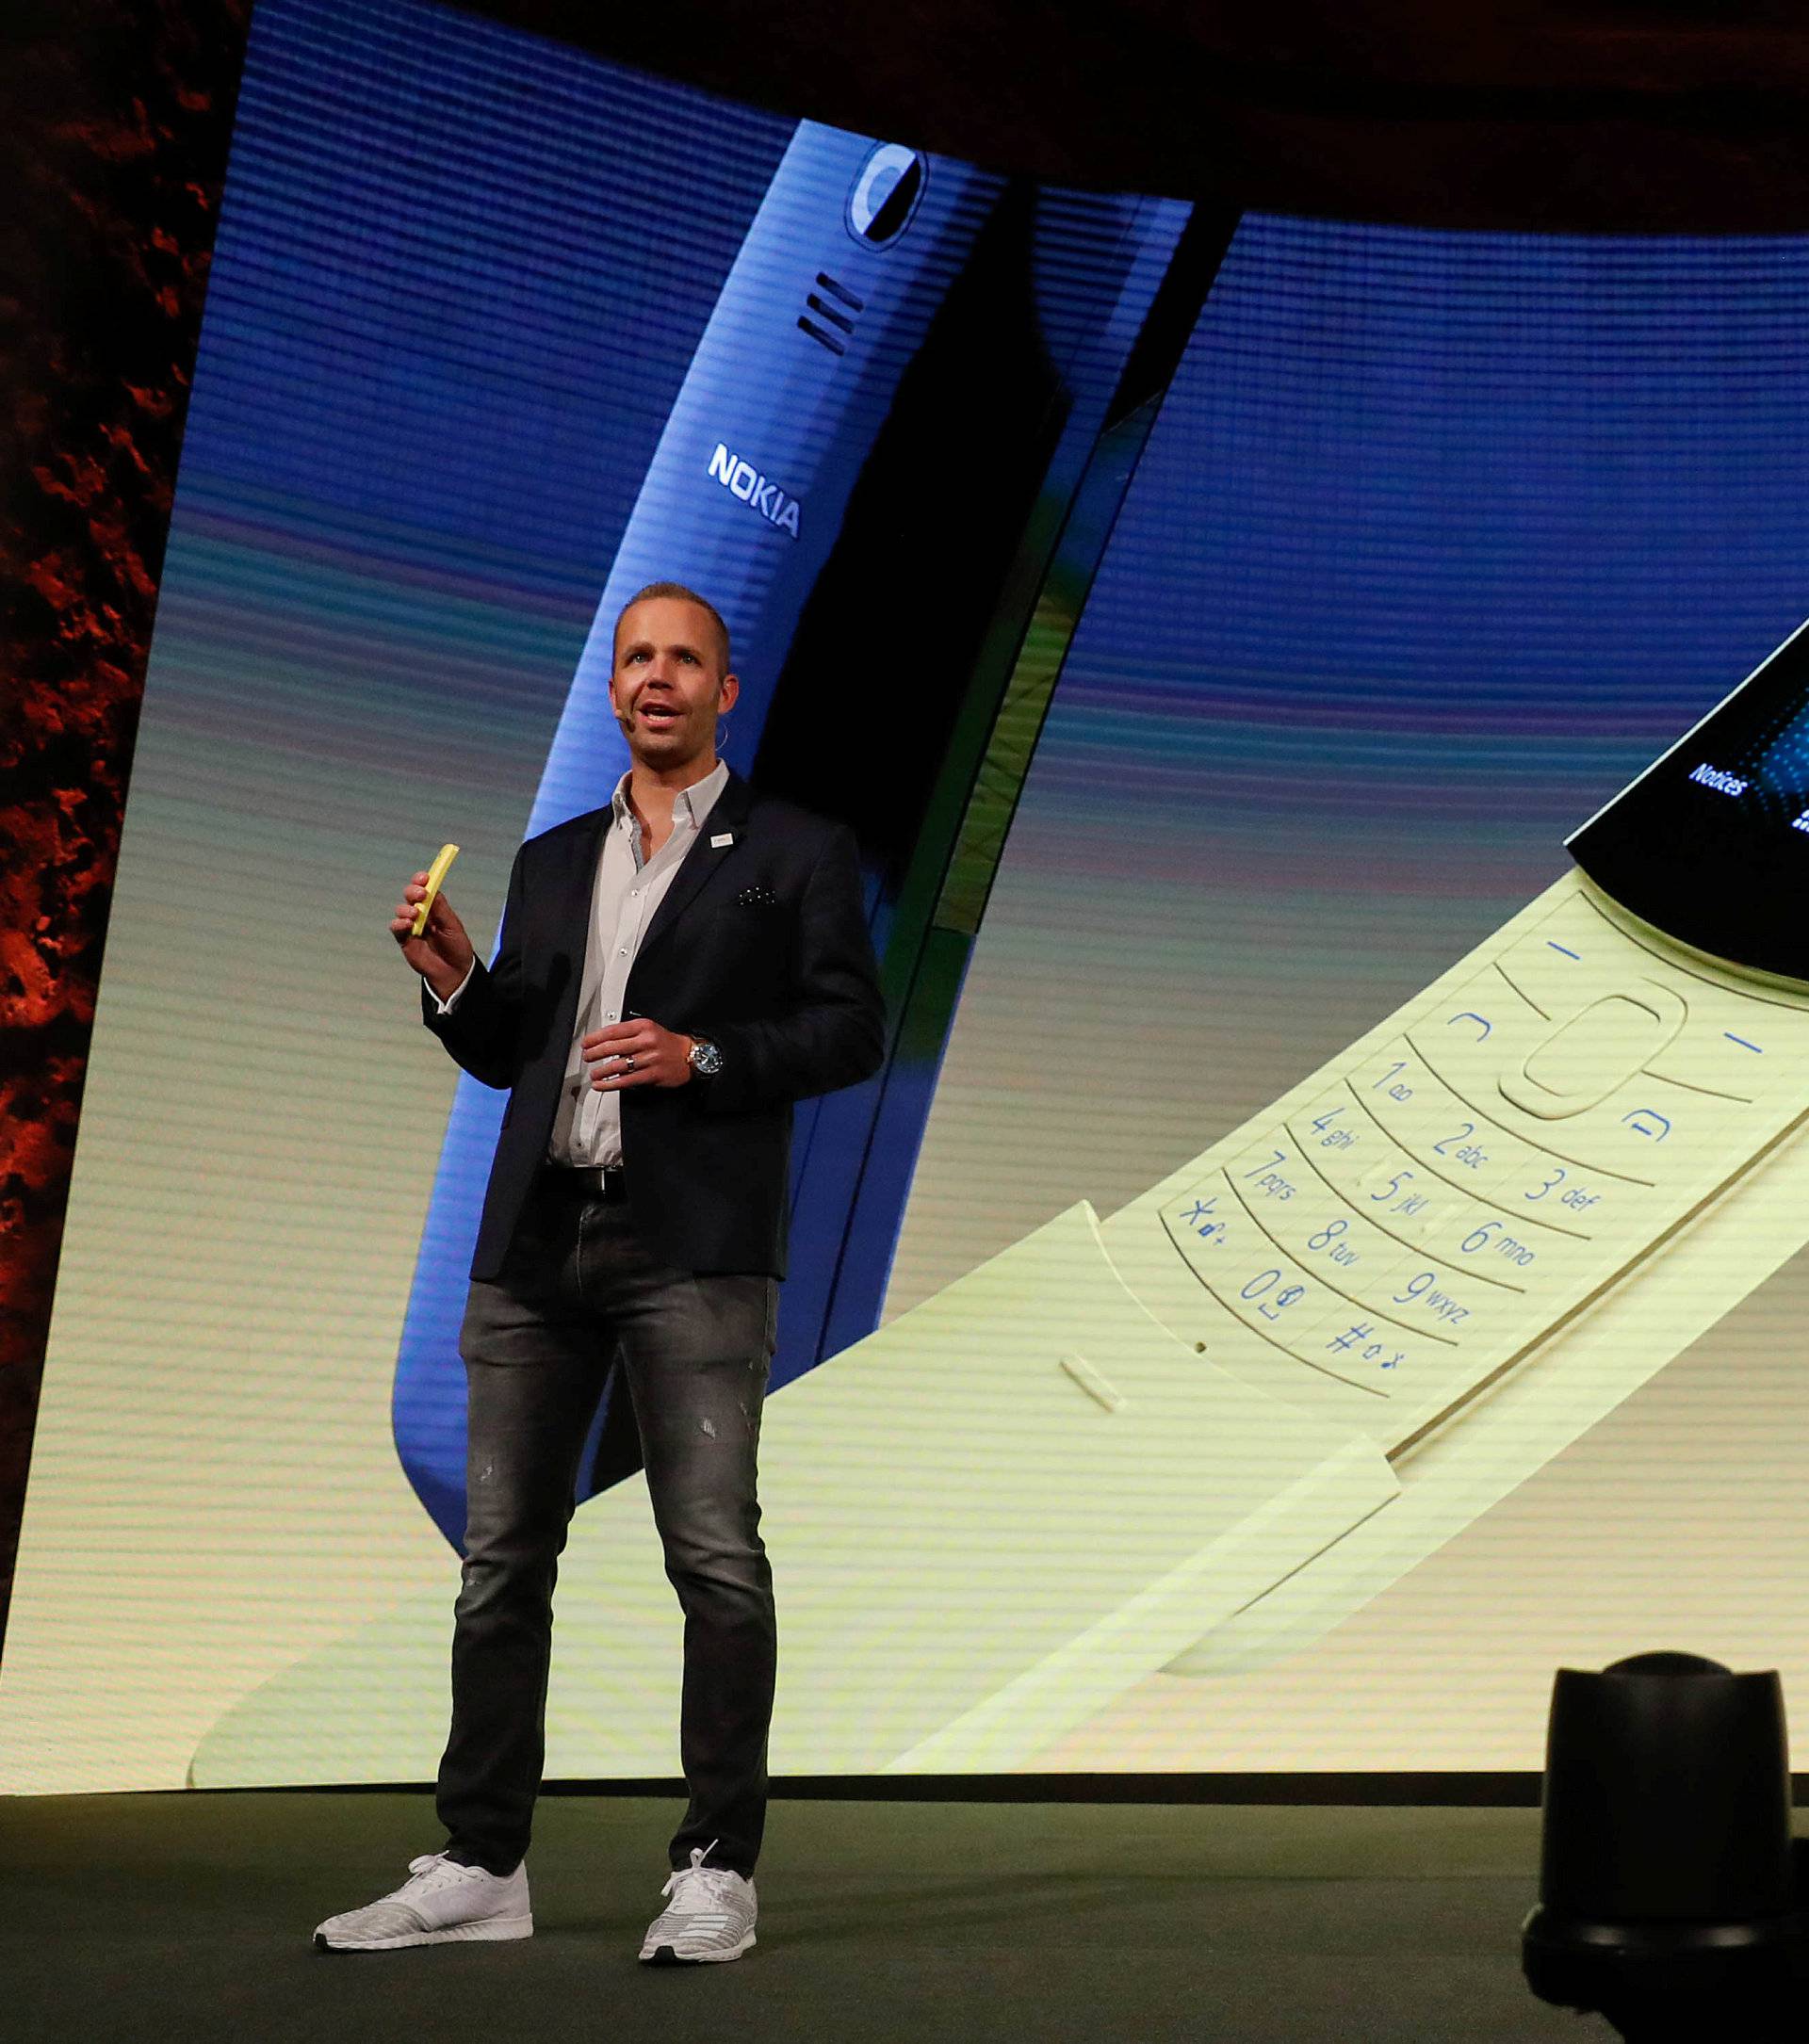 HMD Global Product Officer Sarvikas presents the new Nokia 8110 during the Mobile World Congress in Barcelona